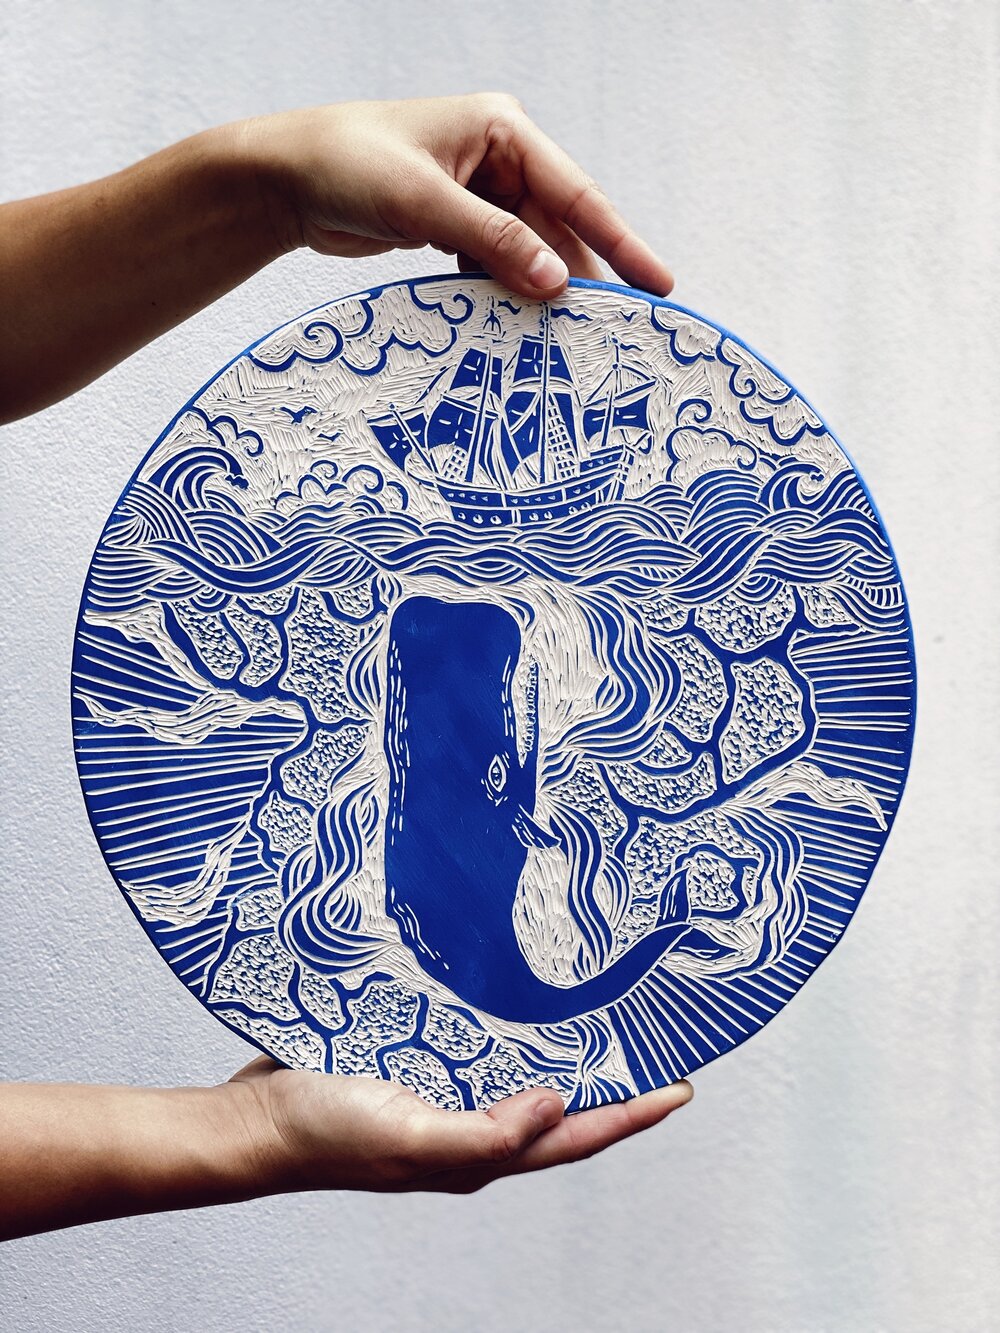 Illustred Ceramic Vessels And Tiles By Clara Holt 14